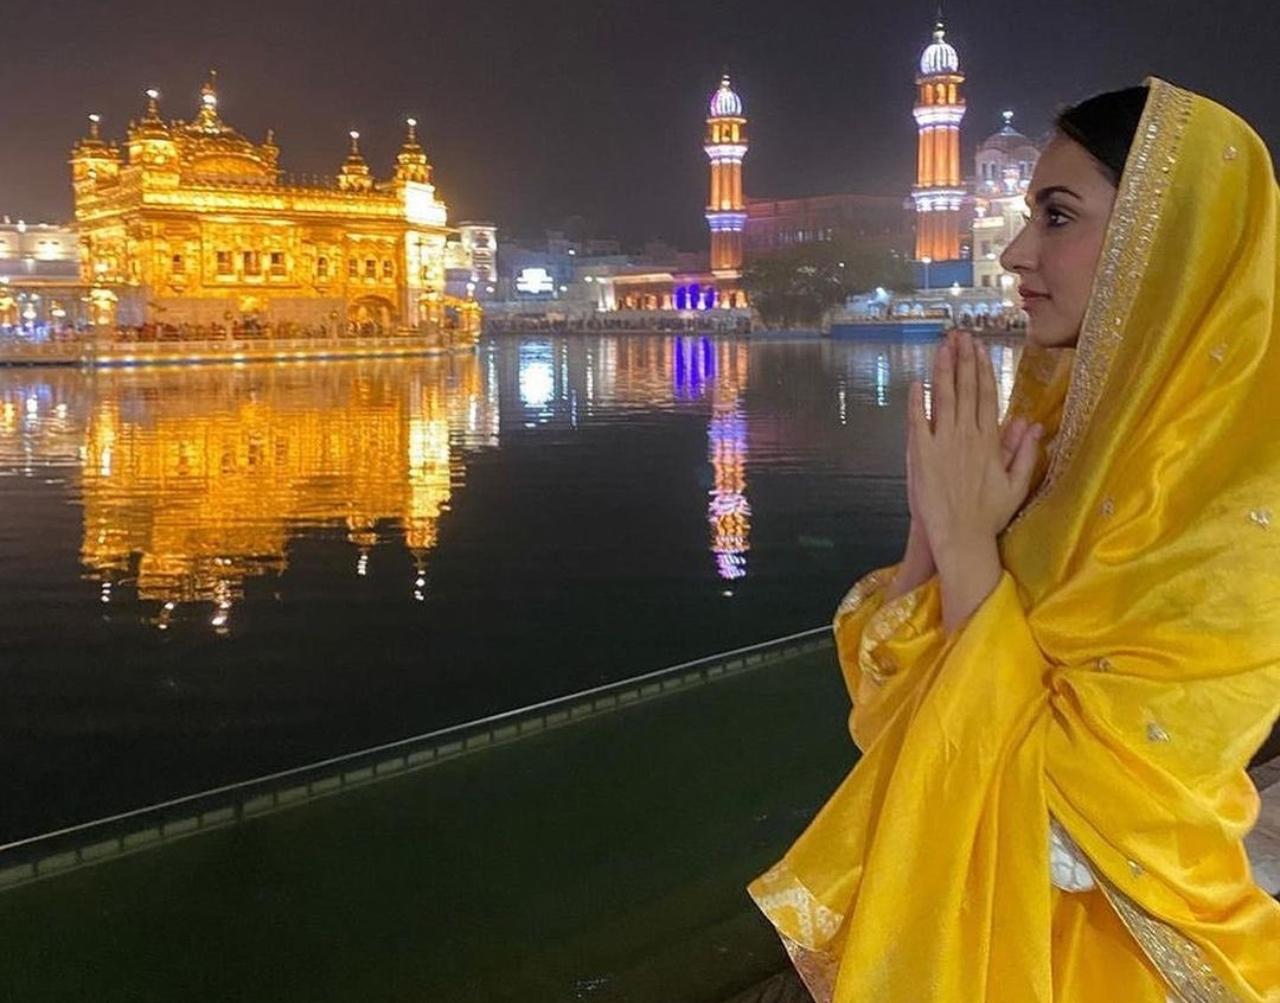 Kiara Advani offered prayers at the Golden Temple a couple of years ago. The actress was dressed in a yellow suit (Source/Kiara Advani Instagram)